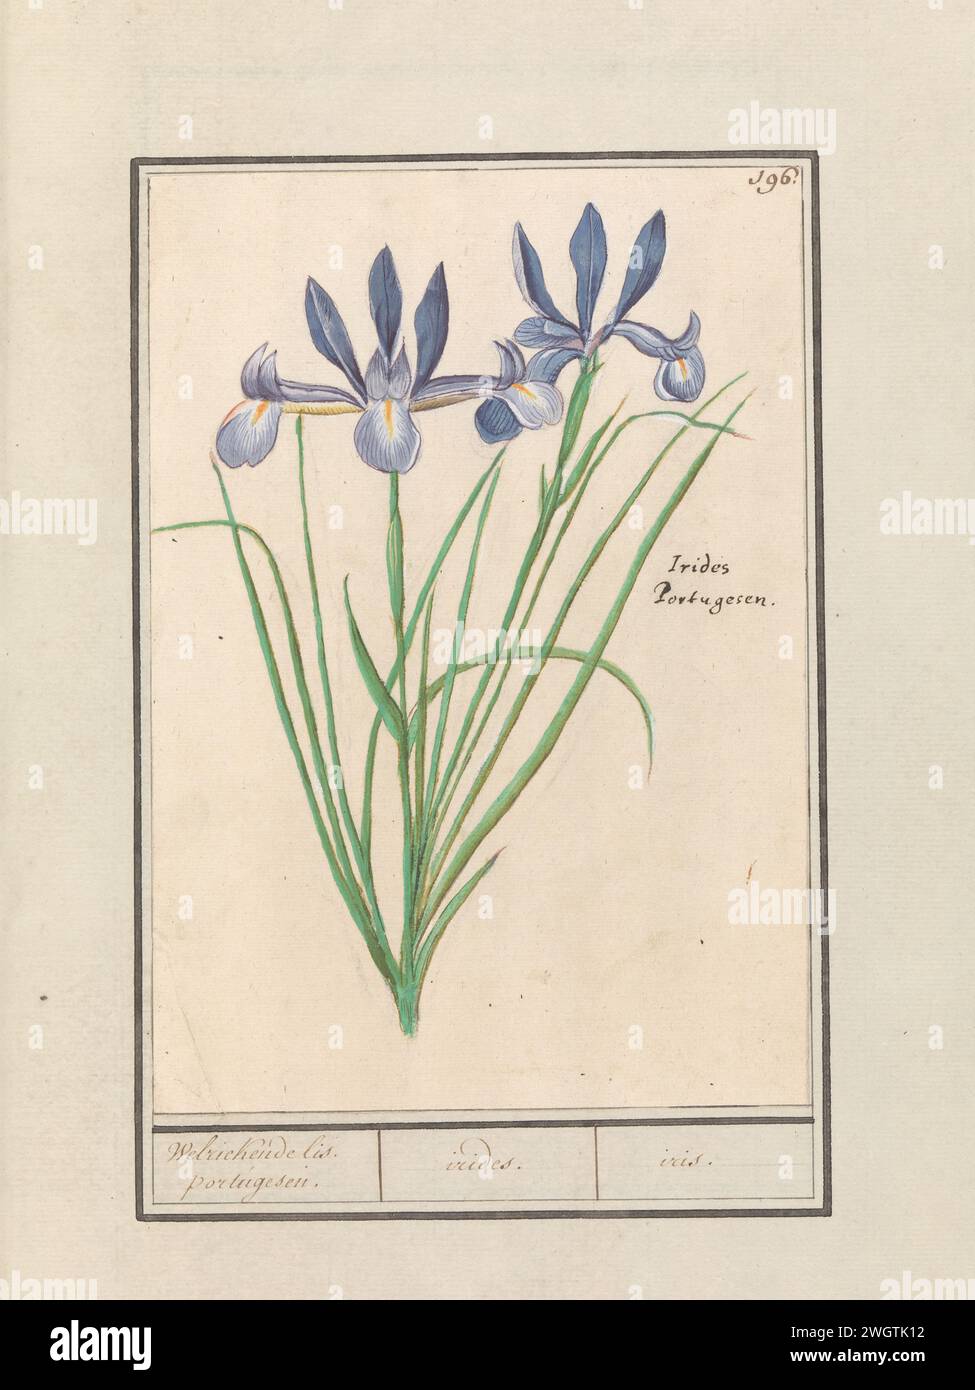 Blue Lis (Iris Sibirica), Anselmus Boëtius de Boodt, 1596 - 1610 drawing Blue Lis. Numbered at the top right: 196. Right the Latin name. Part of the second album with drawings of flowers and plants. Ninth of twelve albums with drawings of animals, birds and plants known around 1600, made commissioned by Emperor Rudolf II. With explanation in Dutch, Latin and French. draughtsman: Praagdraughtsman: Delft paper. watercolor (paint). deck paint. chalk. ink brush / pen flowers: iris Stock Photo